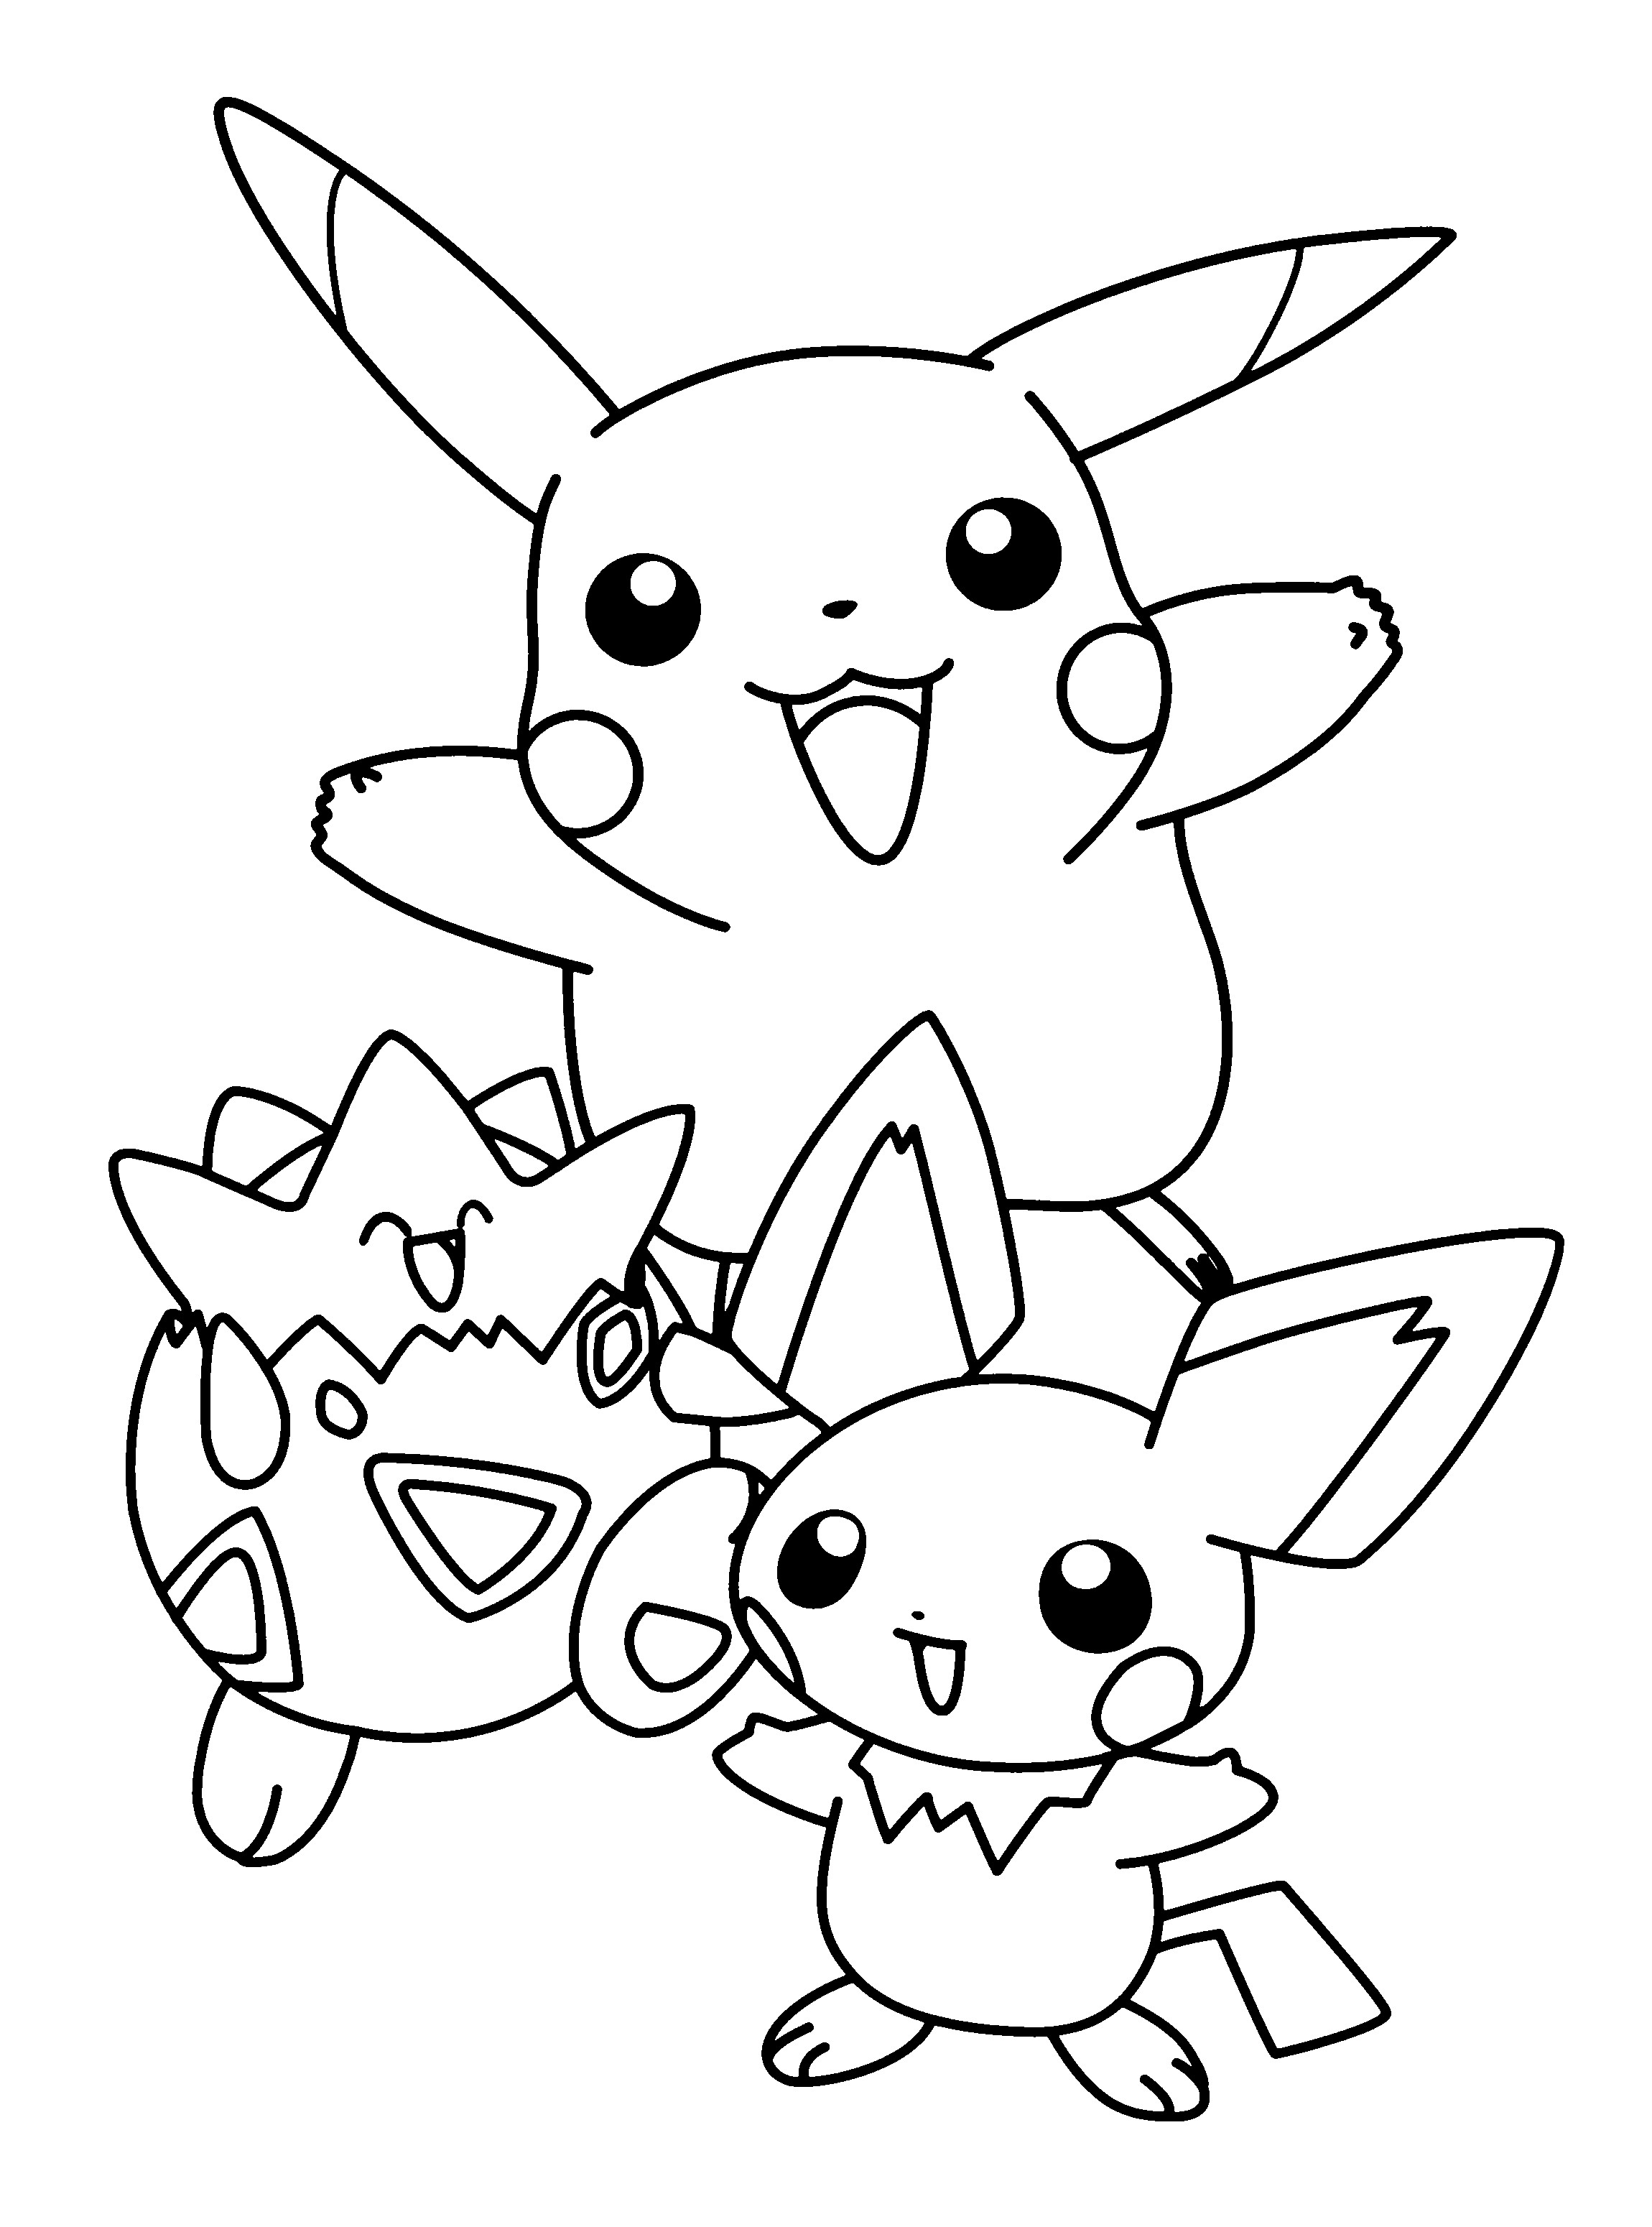 Coloring Pages For Boys Pikachu
 Pokemon Coloring Pages Join your favorite Pokemon on an